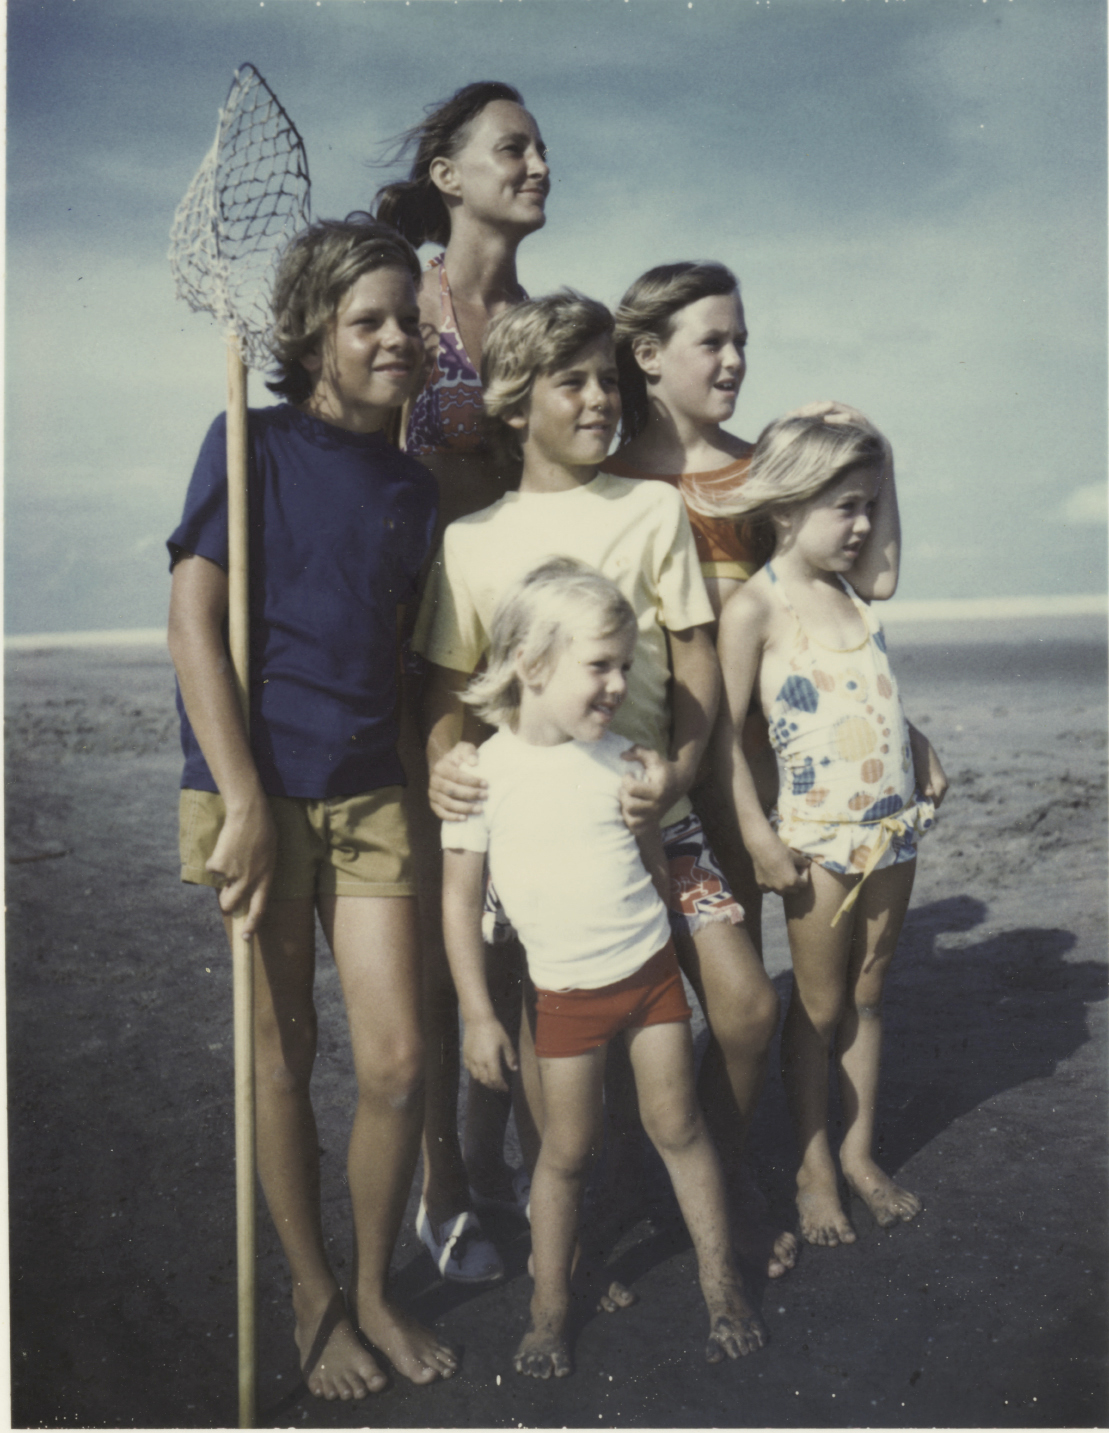 Author Edward Marshall’s stepmother, Lynn, stands ready to catch crabs with her extended brood.